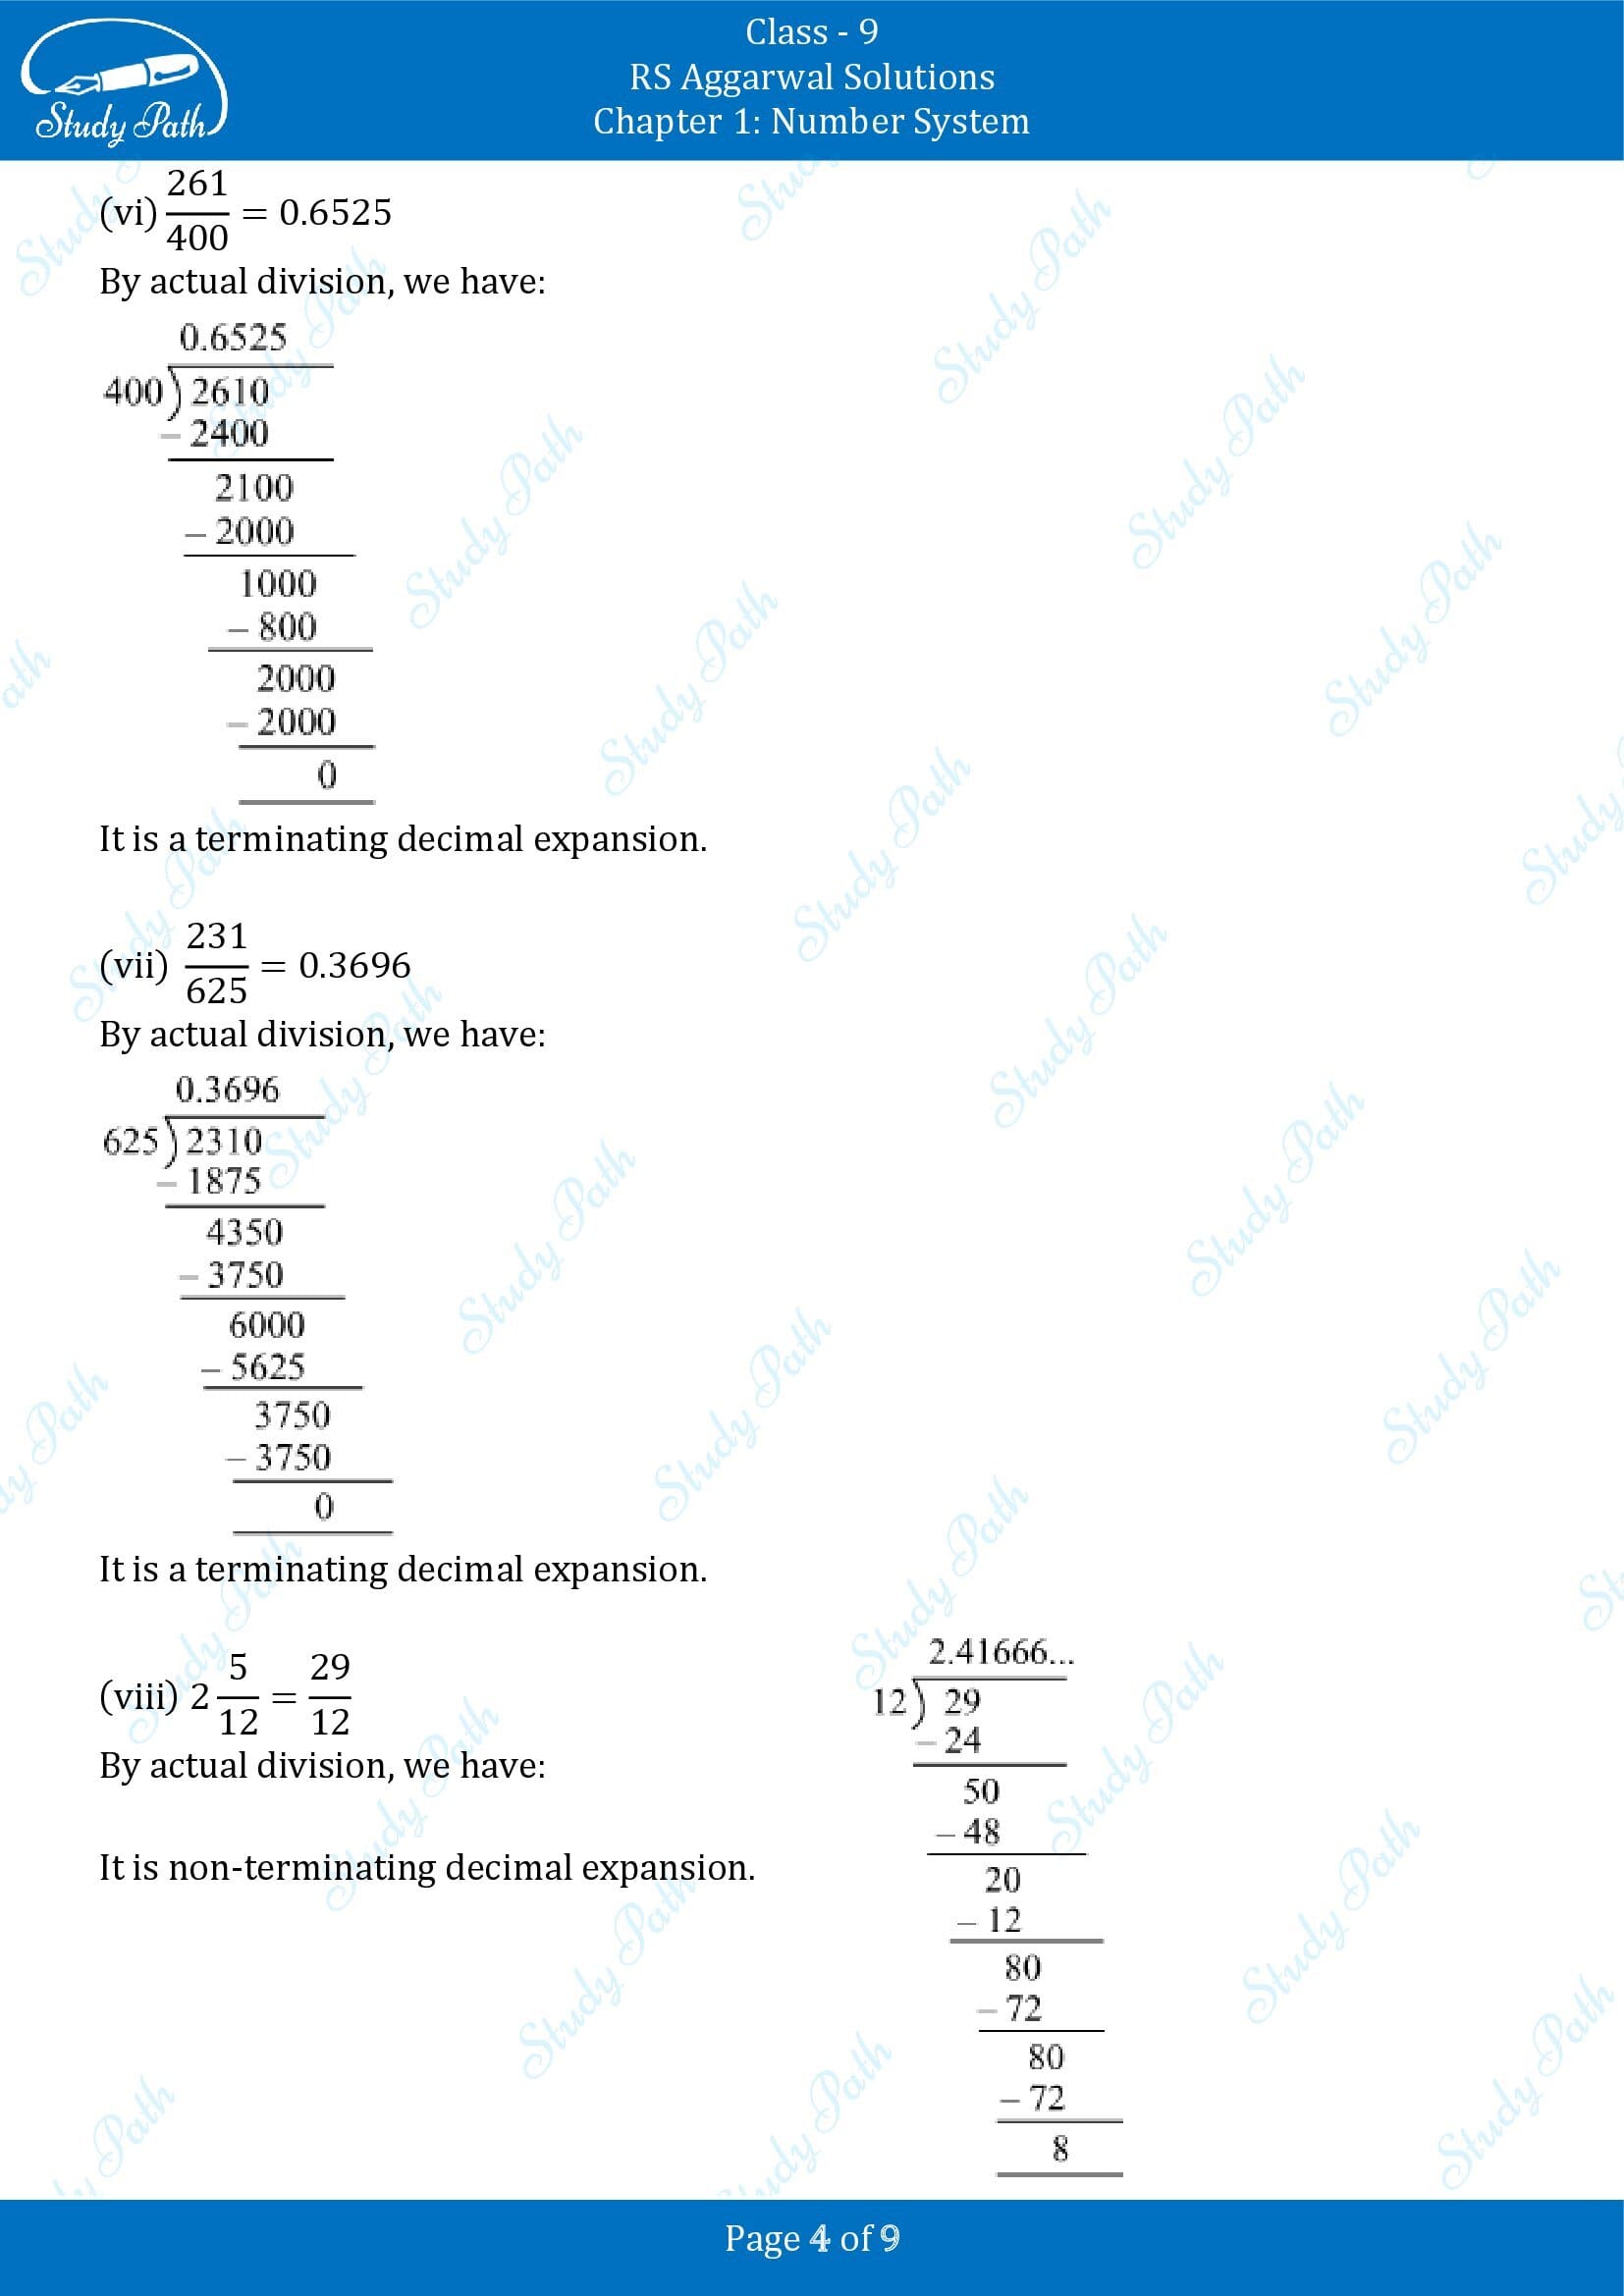 RS Aggarwal Solutions Class 9 Chapter 1 Number System Exercise 1B 00004